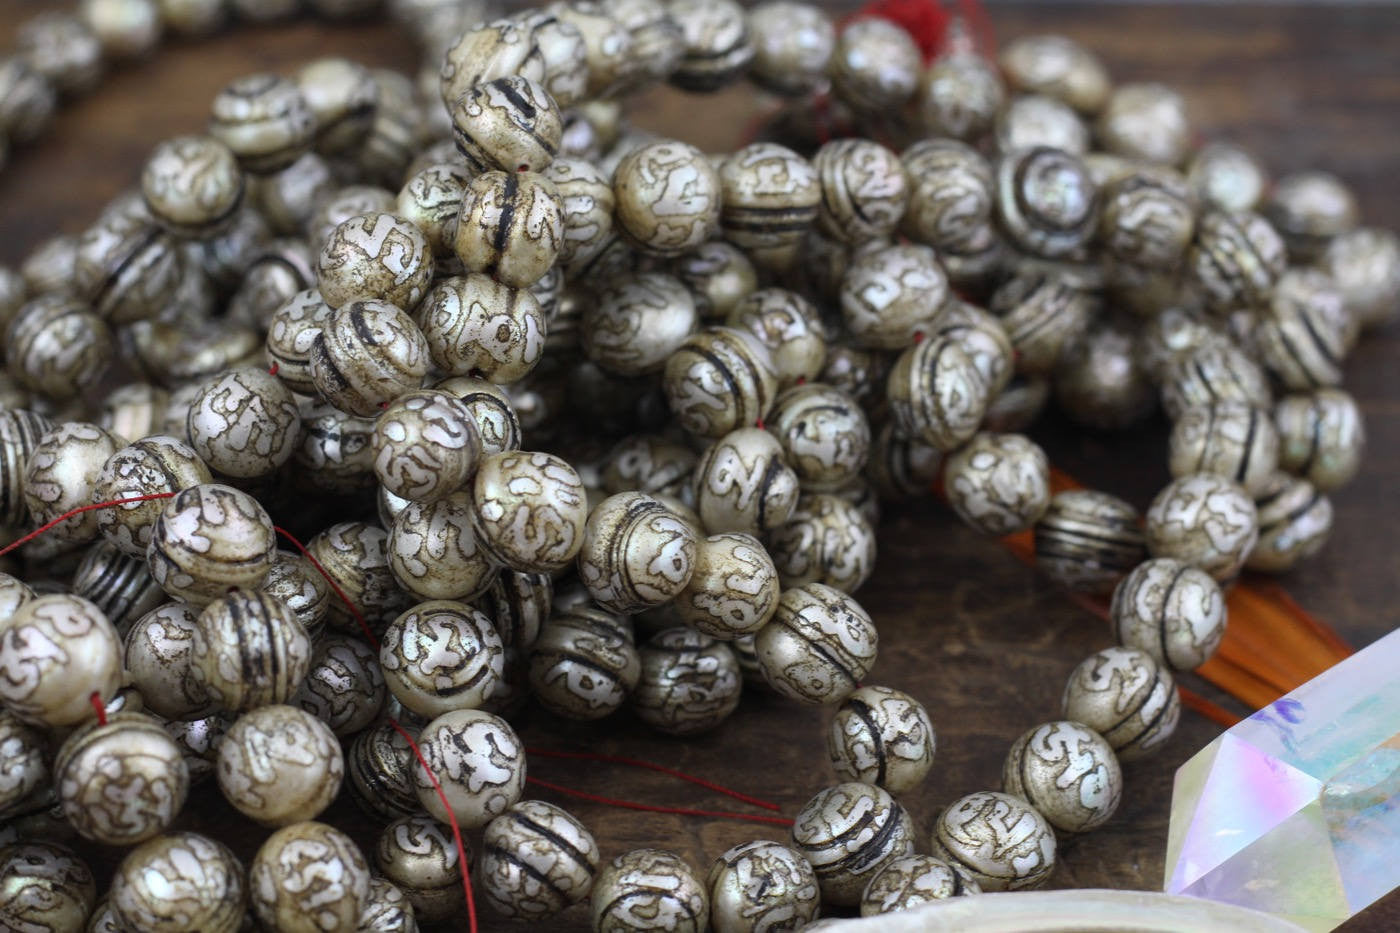 Pearly Om: 10 Silver Grey Loose Engraved Pearl Beads 11x13mm - ShopWomanShopsWorld.com. Bone Beads, Tassels, Pom Poms, African Beads.